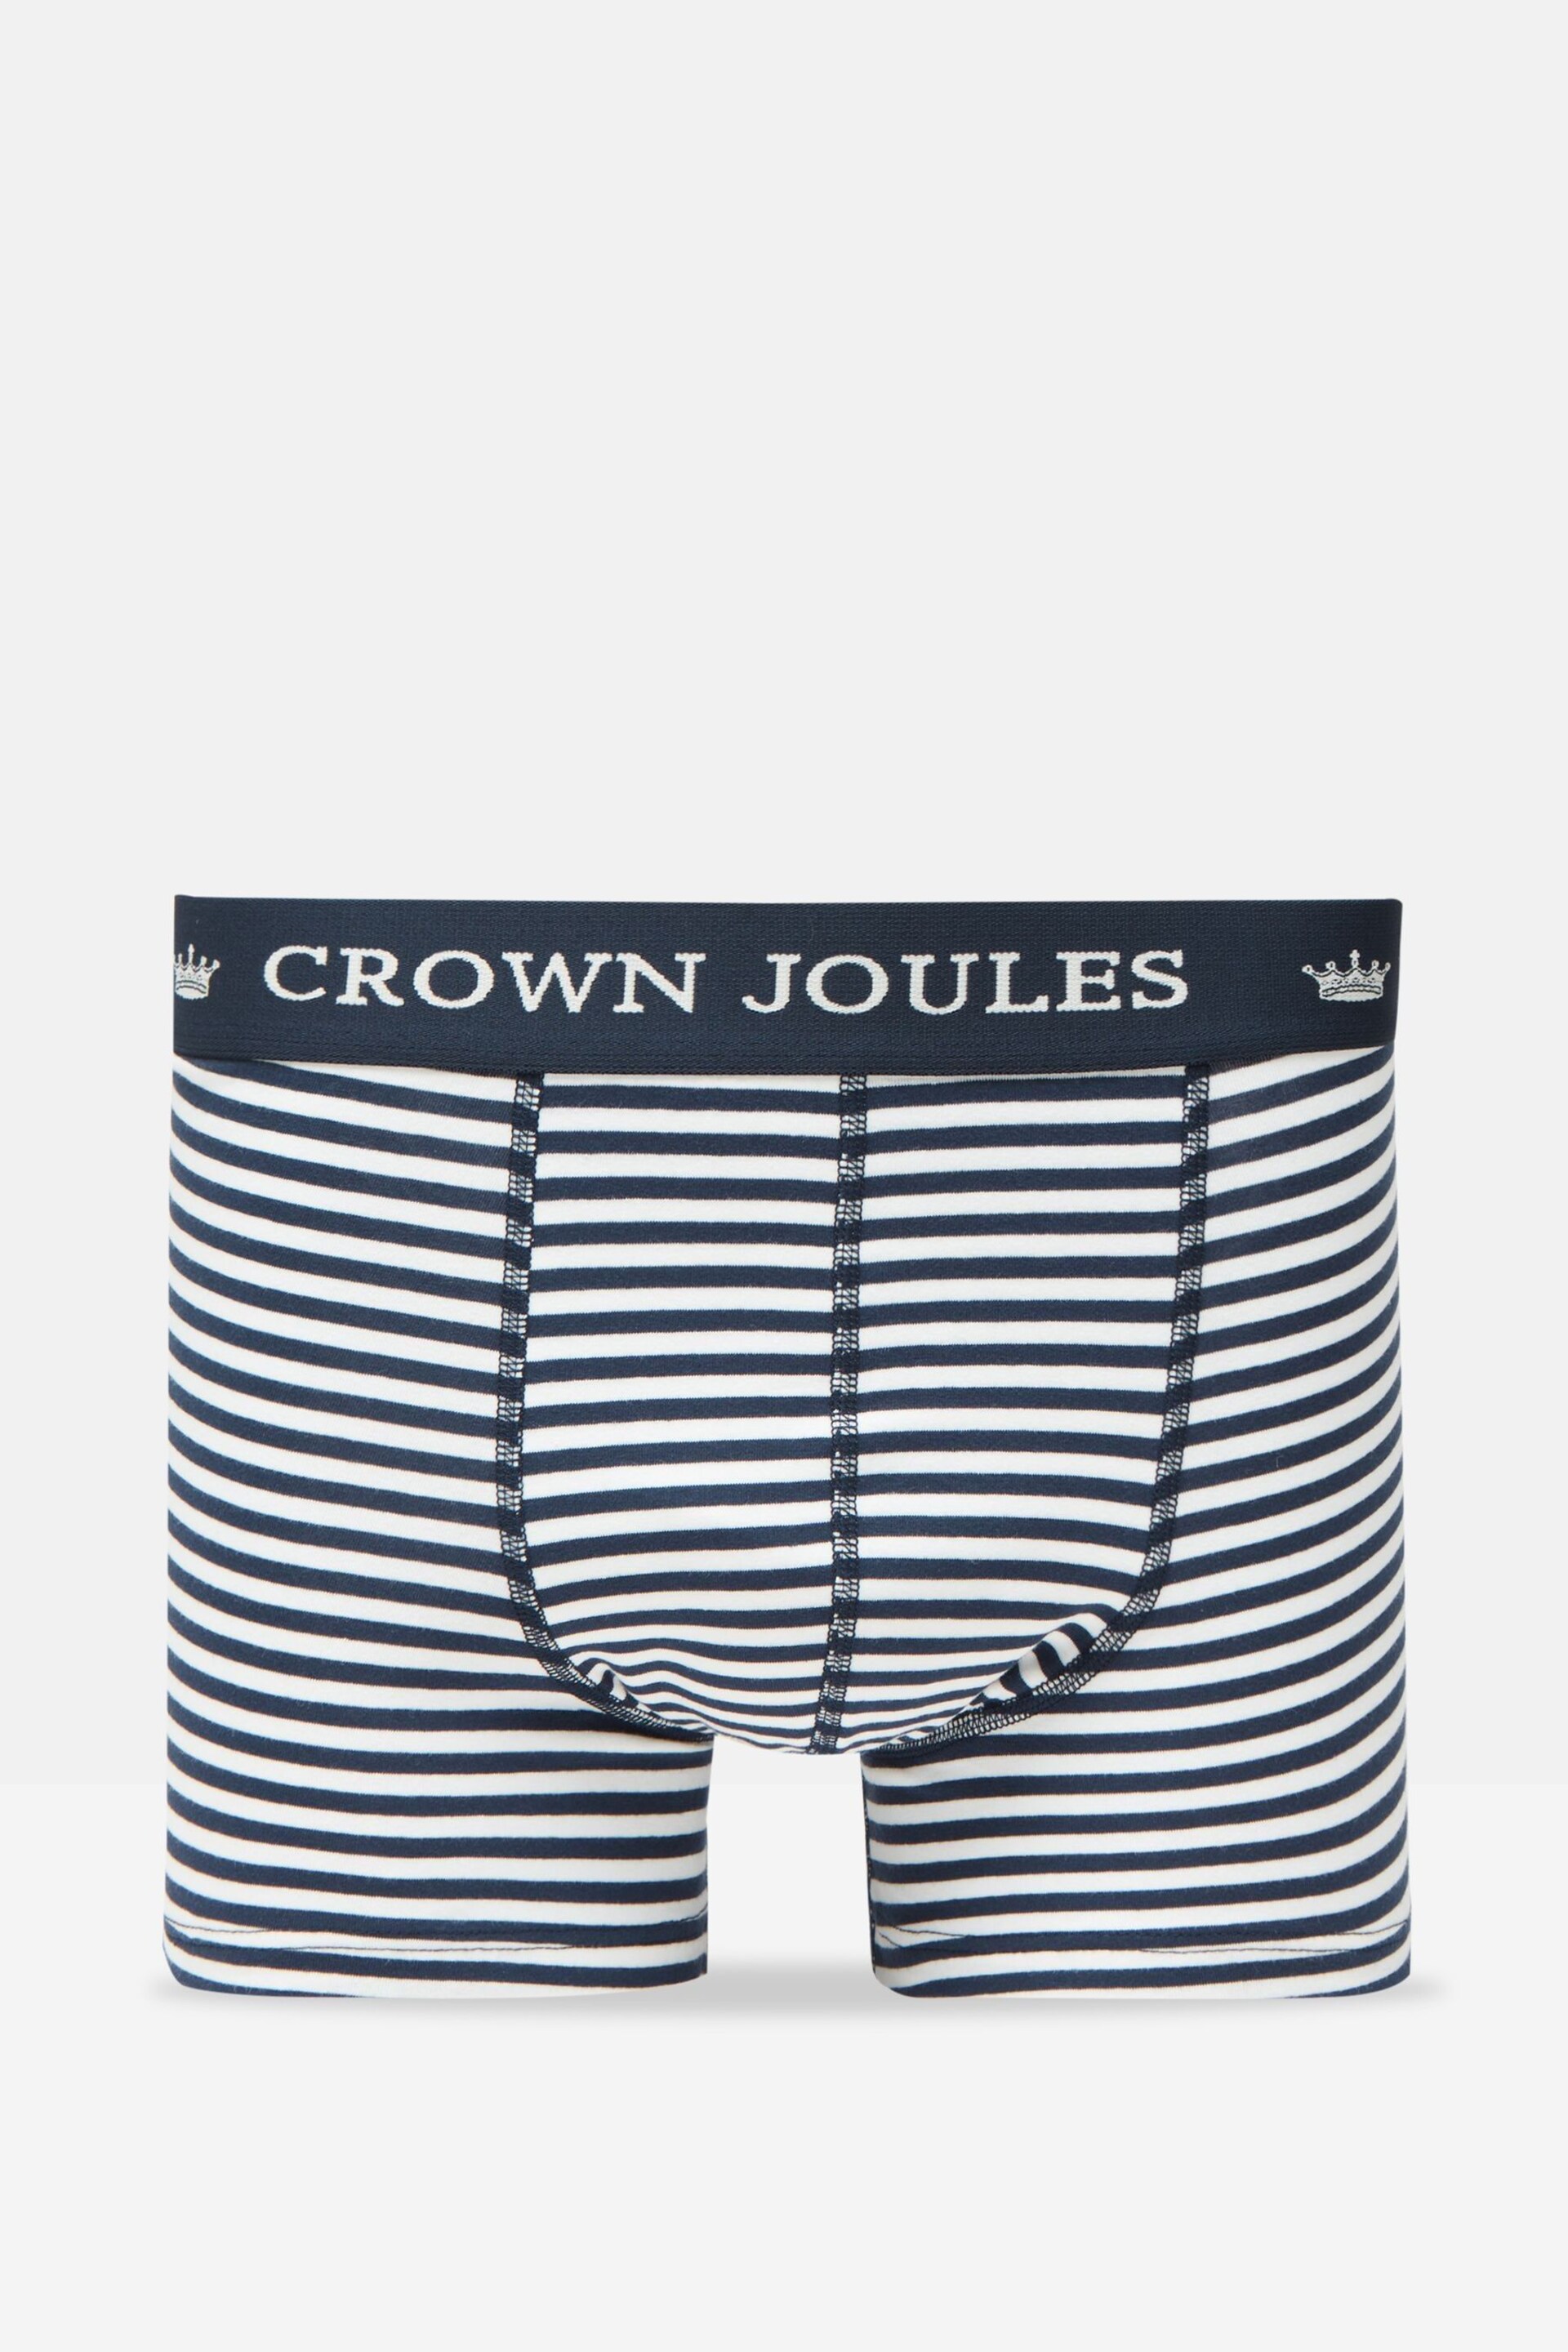 Joules Crown Navy & White Crest Cotton Boxer Briefs 2 Pack - Image 3 of 4